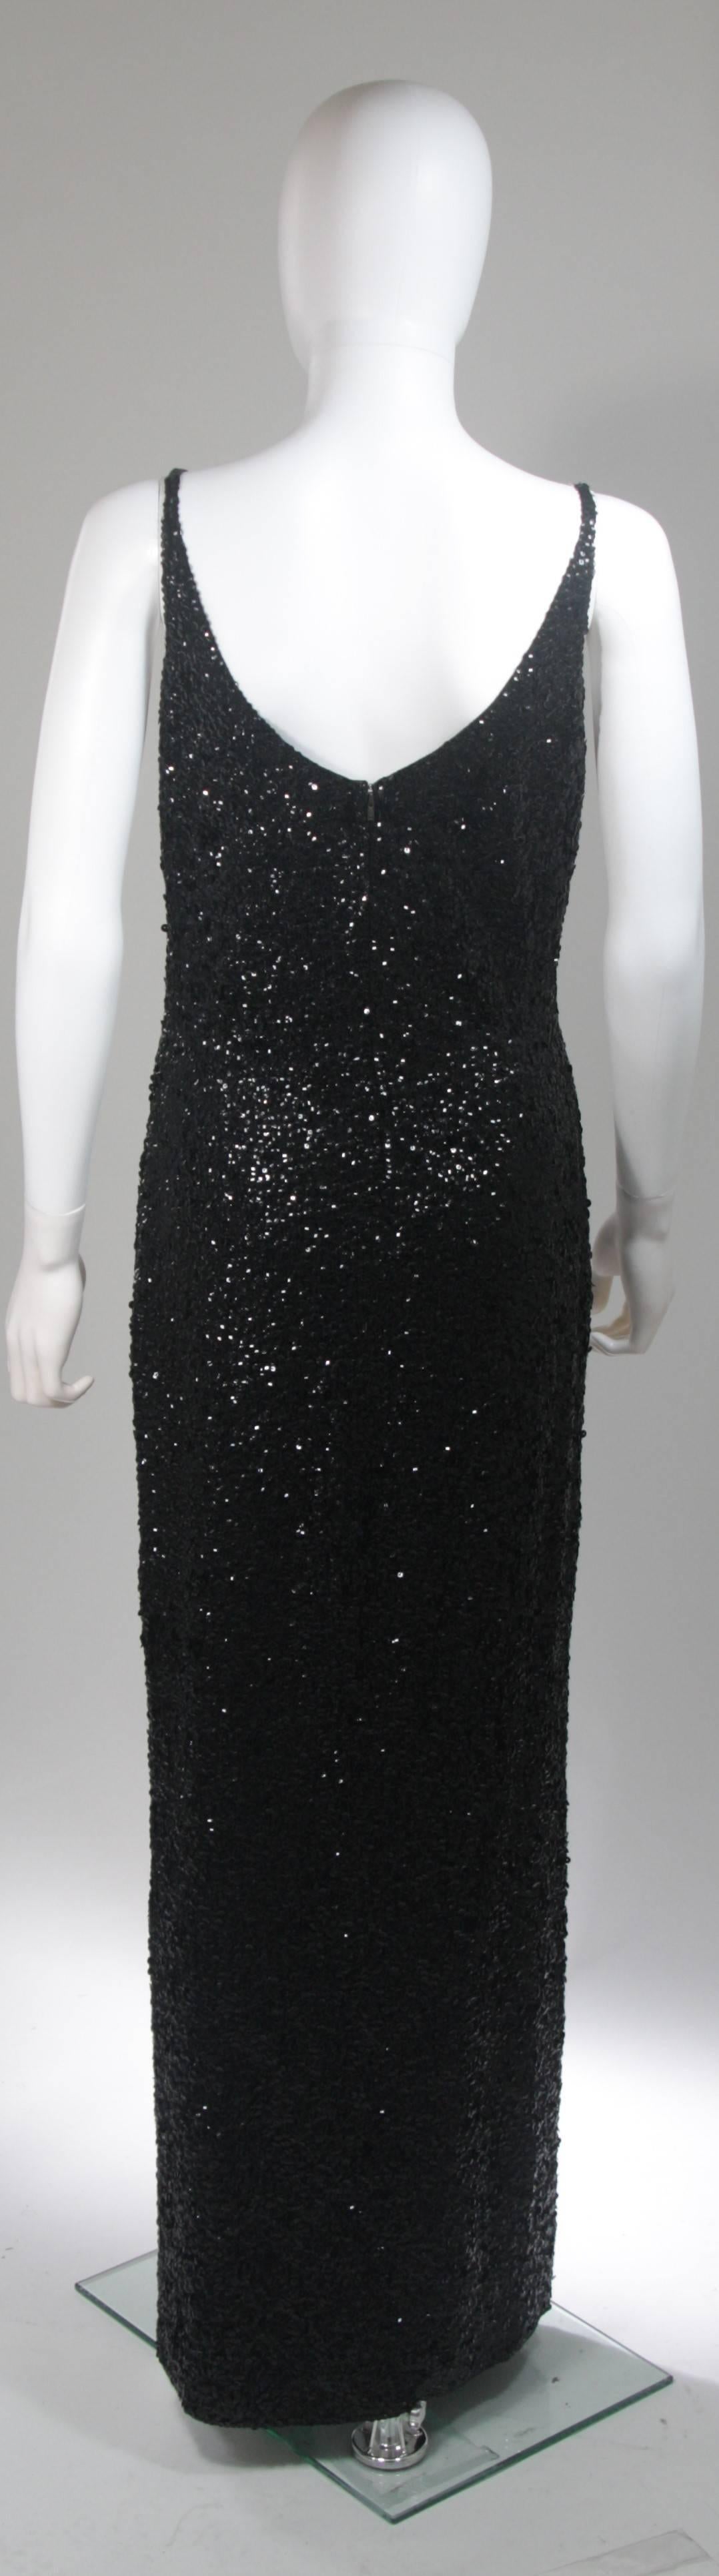 Gene Shelly Black Sequin Knit Gown Size 14 2